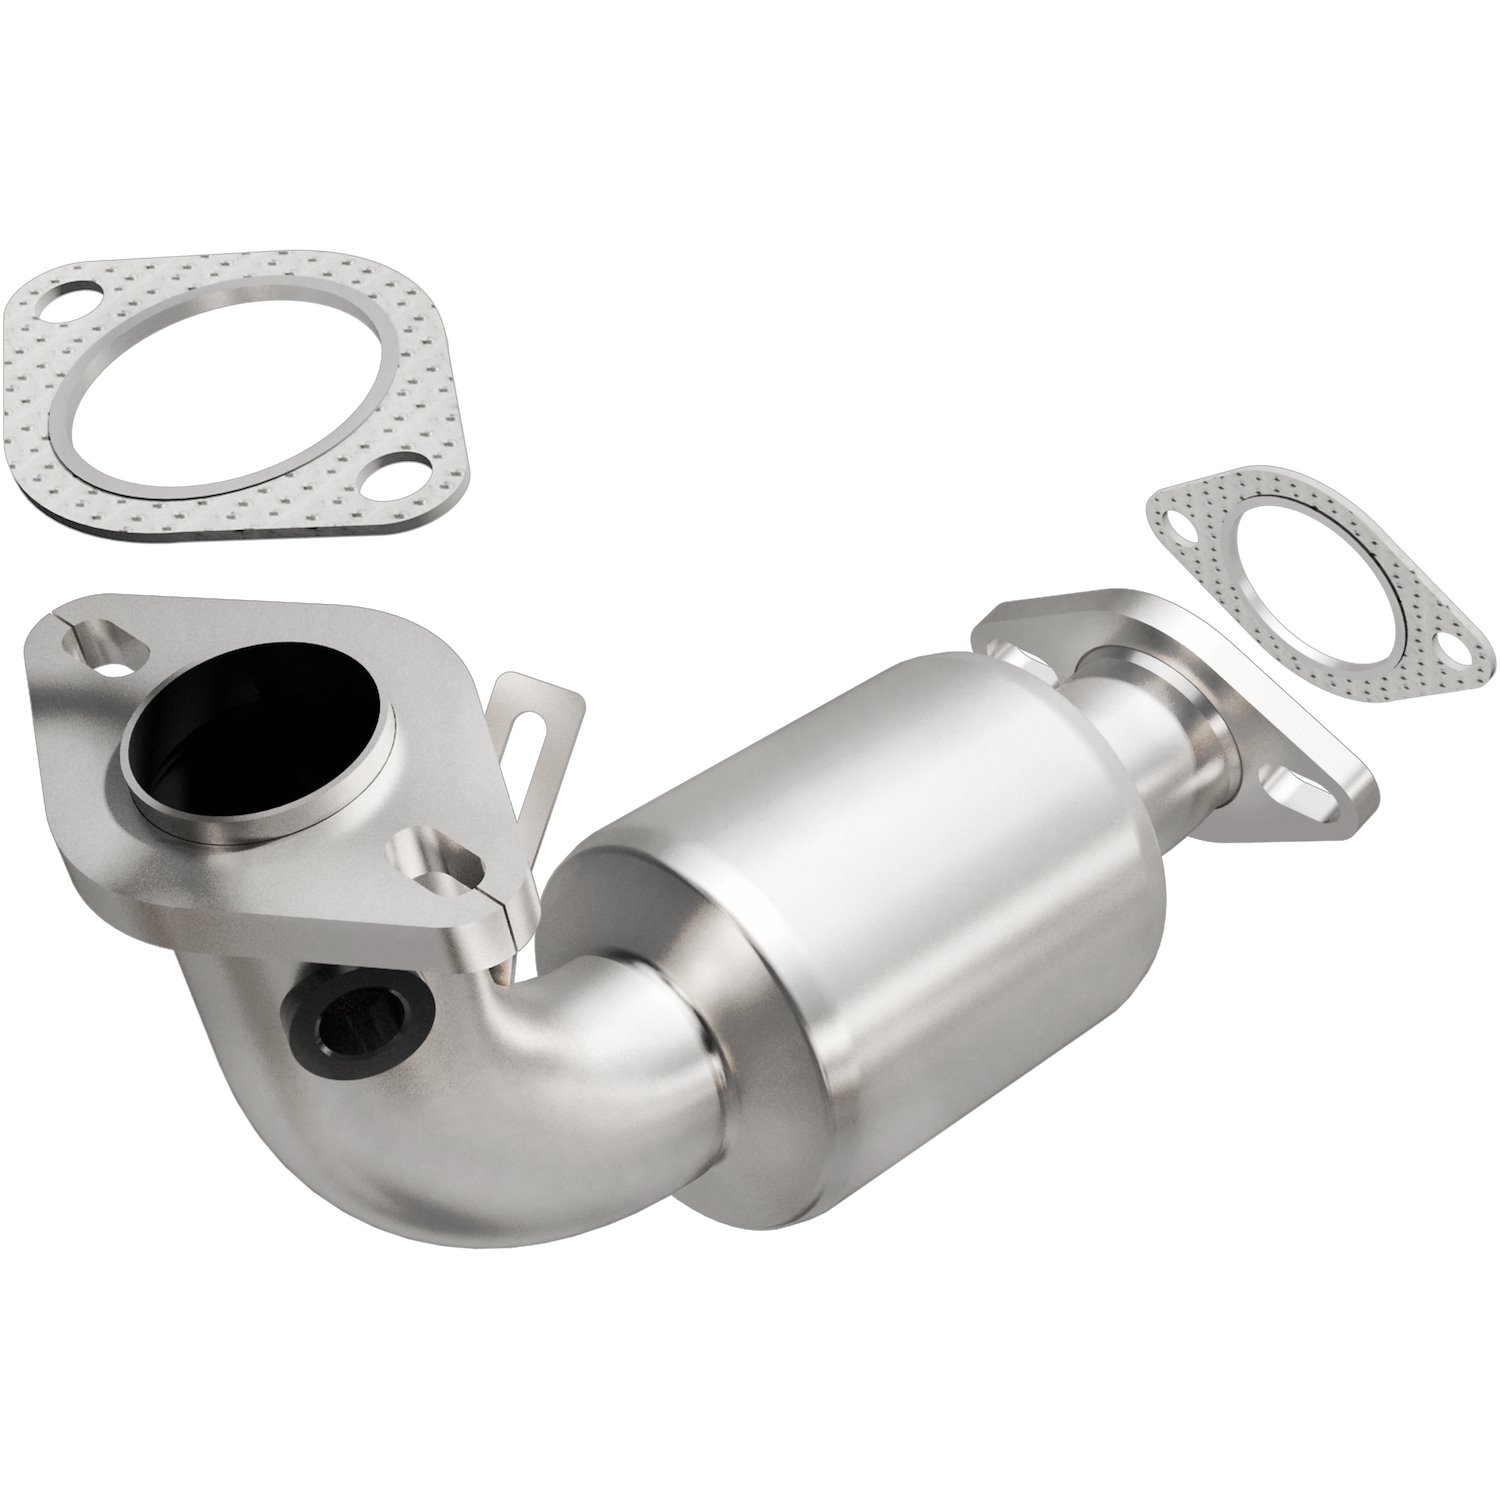 HM Grade Federal / EPA Compliant Direct-Fit Catalytic Converter 93193